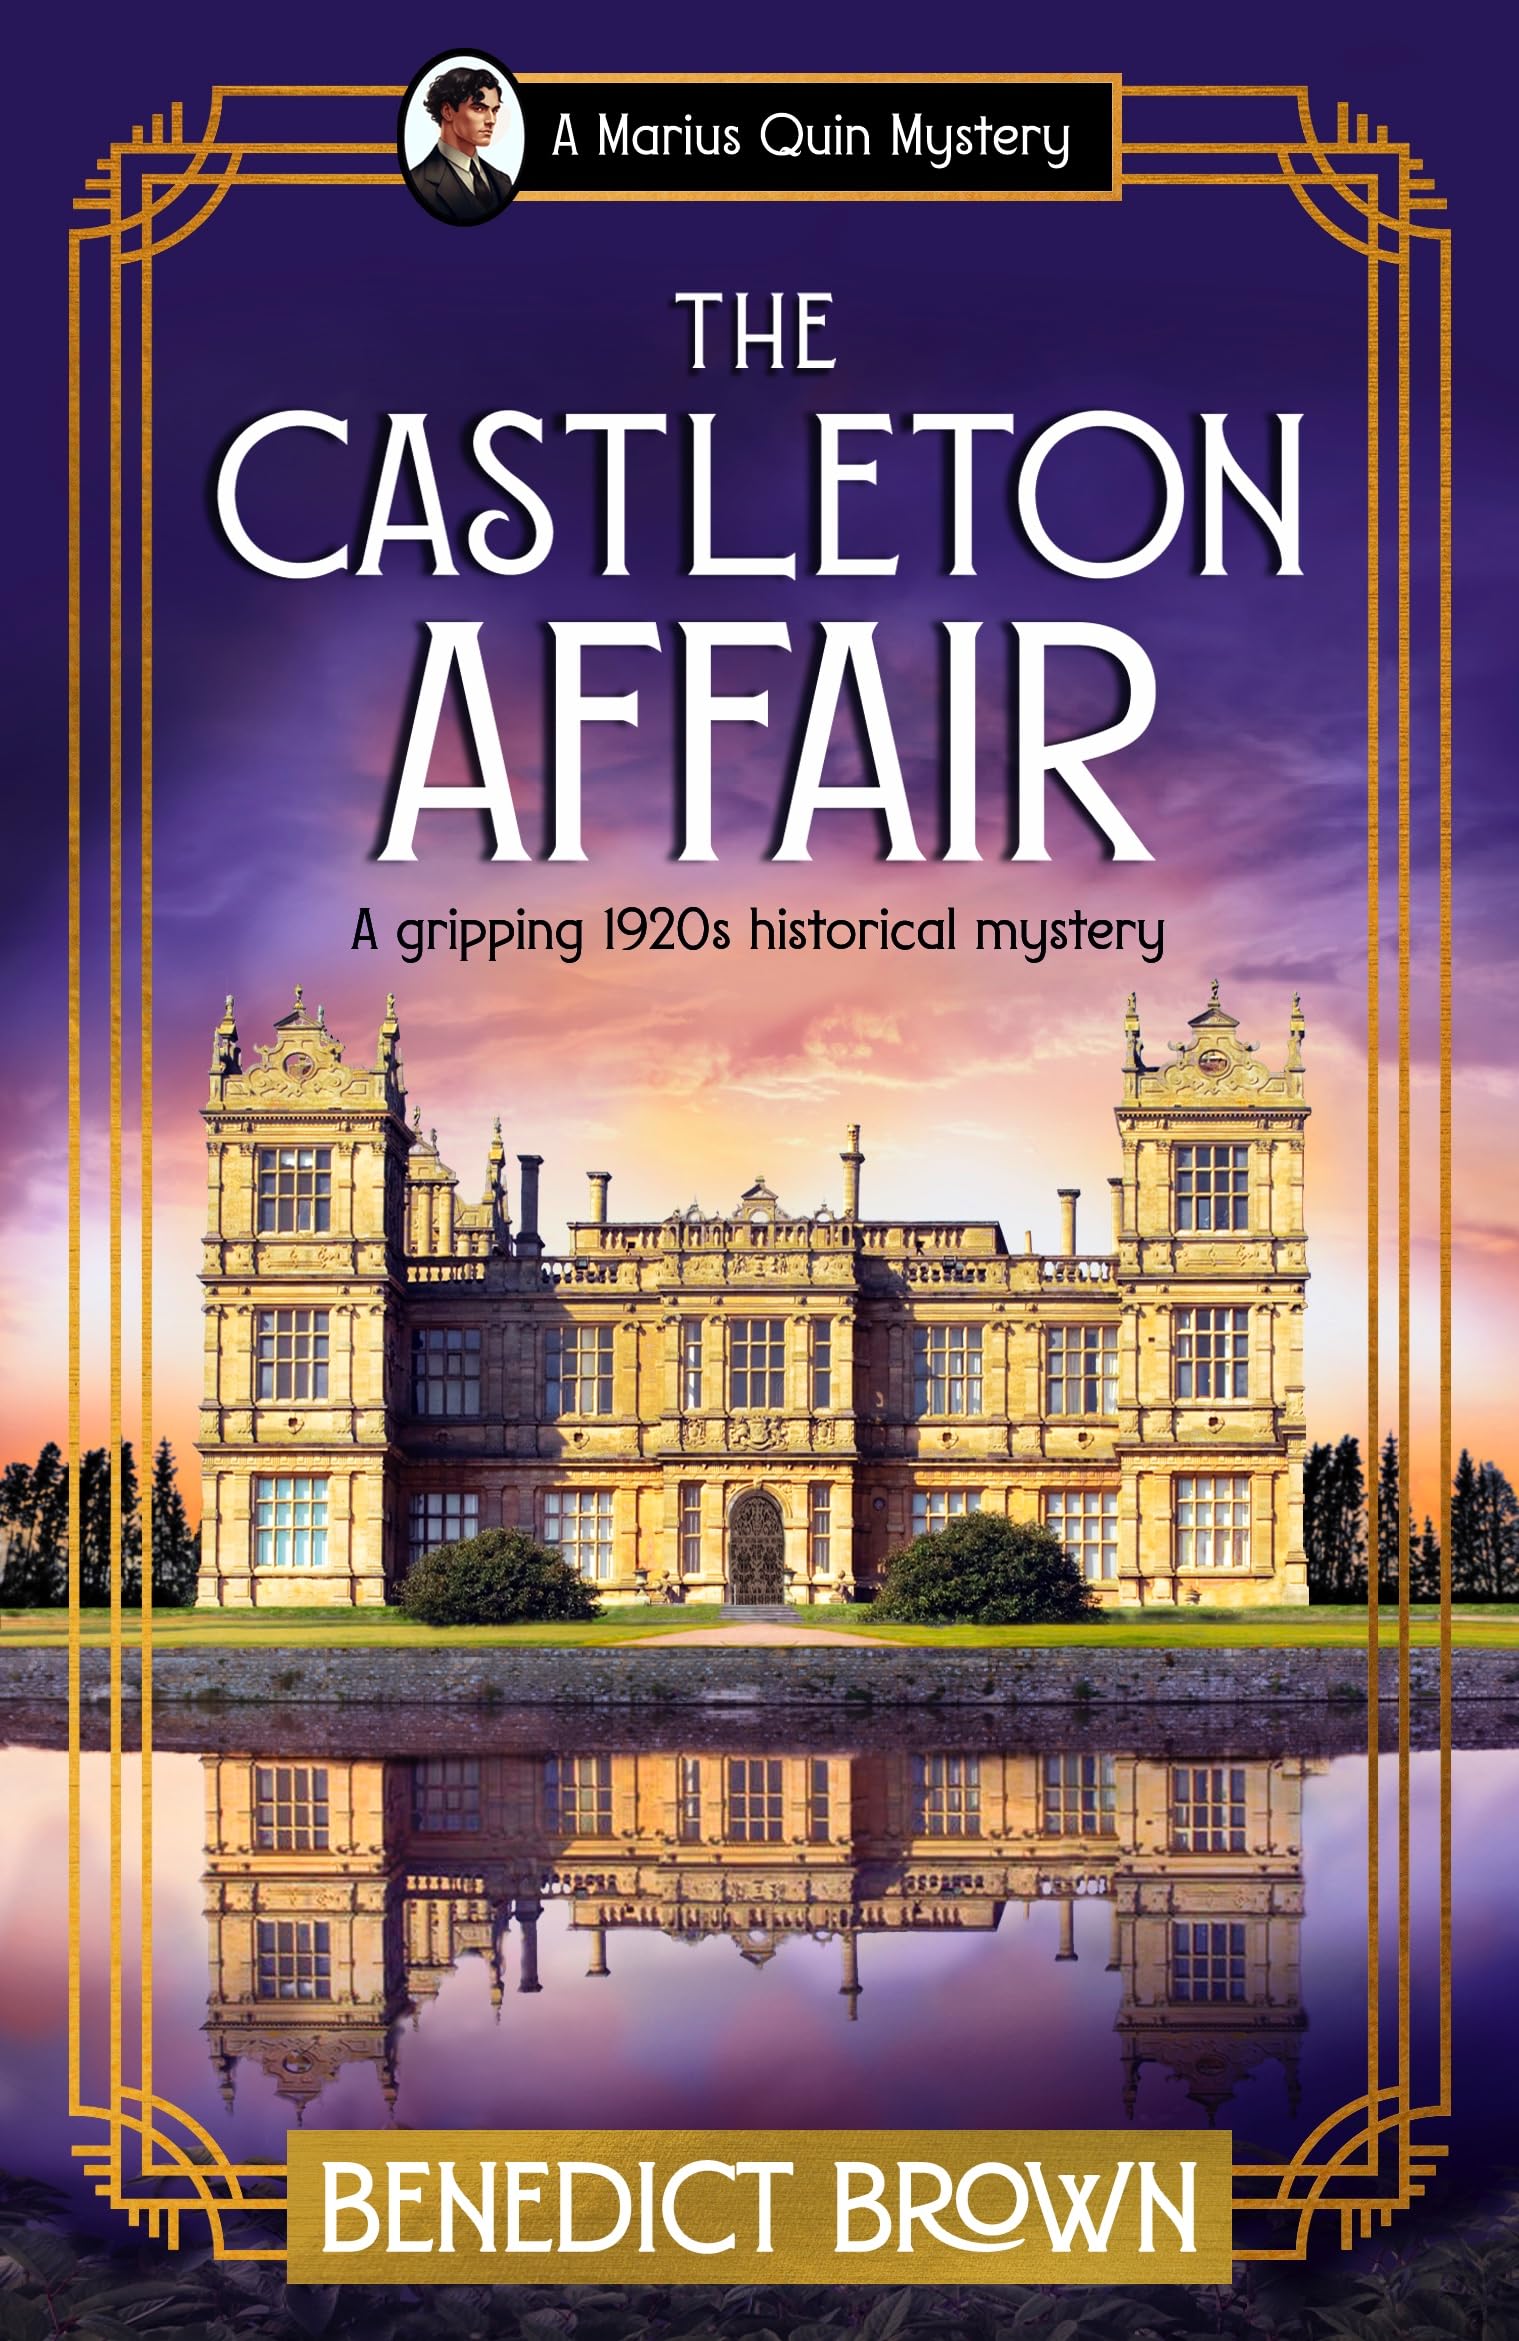 The Castleton Affair: A gripping 1920s historical mystery (A Marius Quin Mystery Book 3)